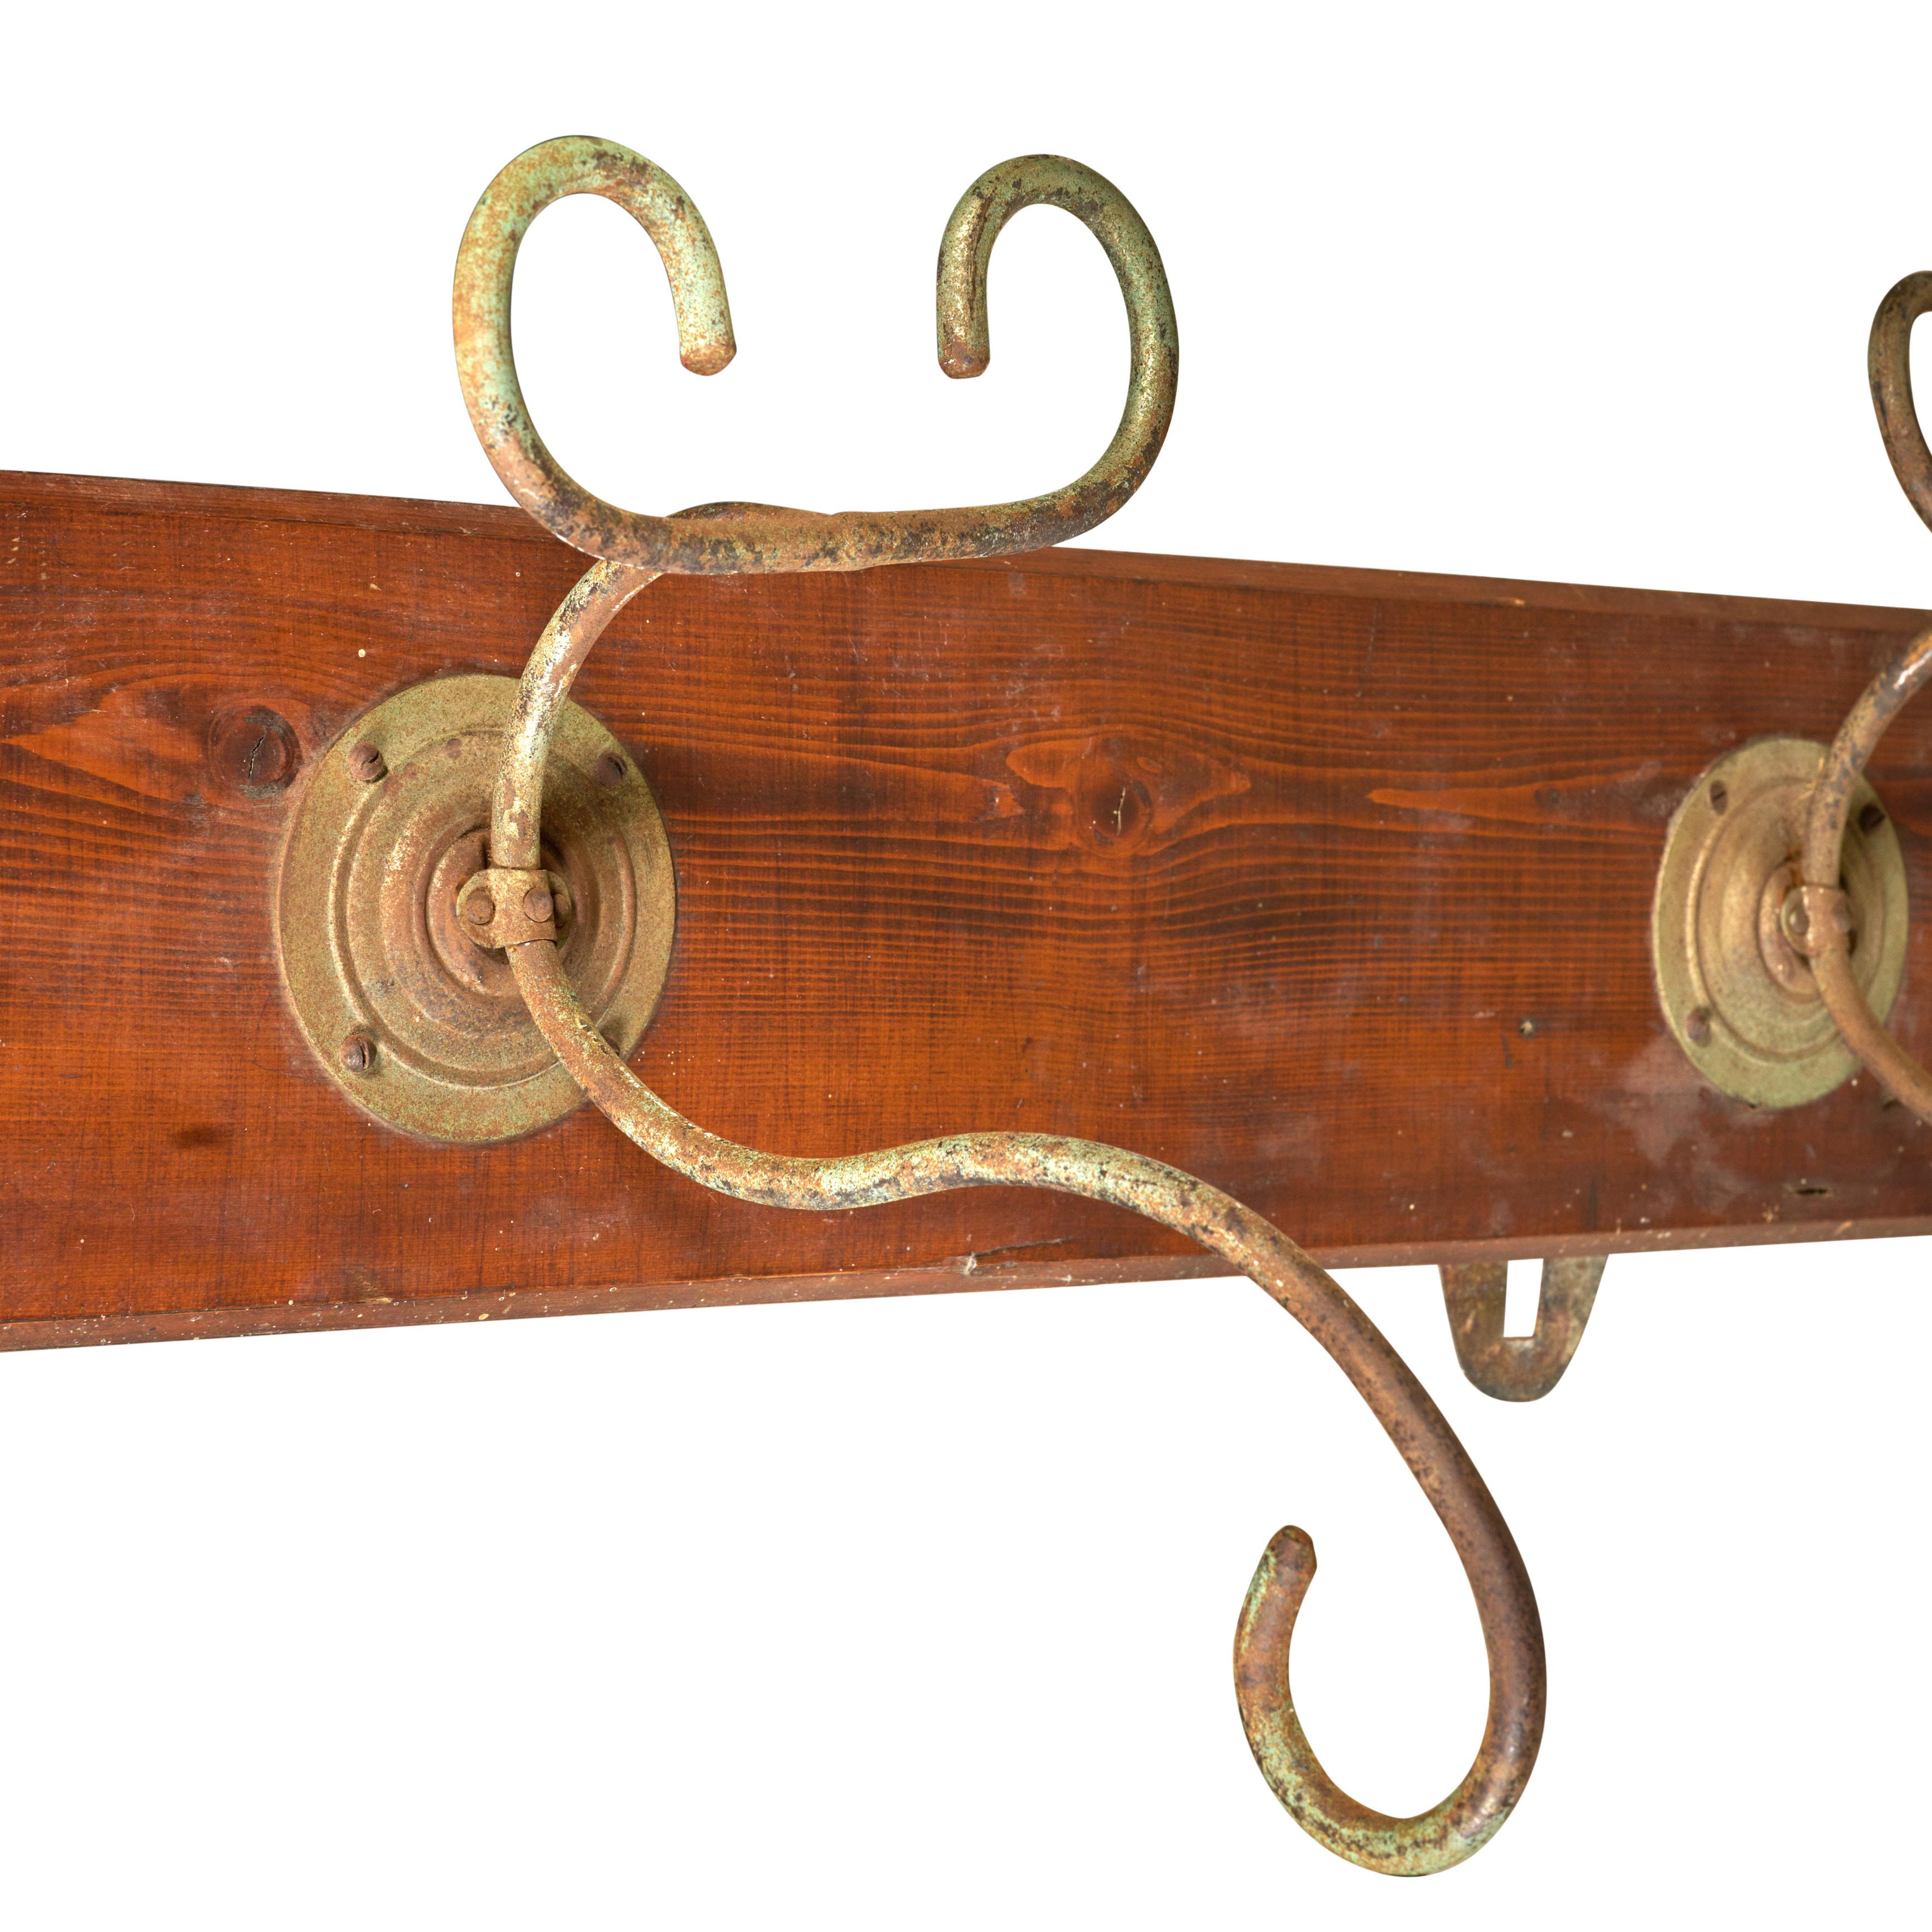 Four hook coat/hat rack - wrought iron and wood. Wall mounted. 